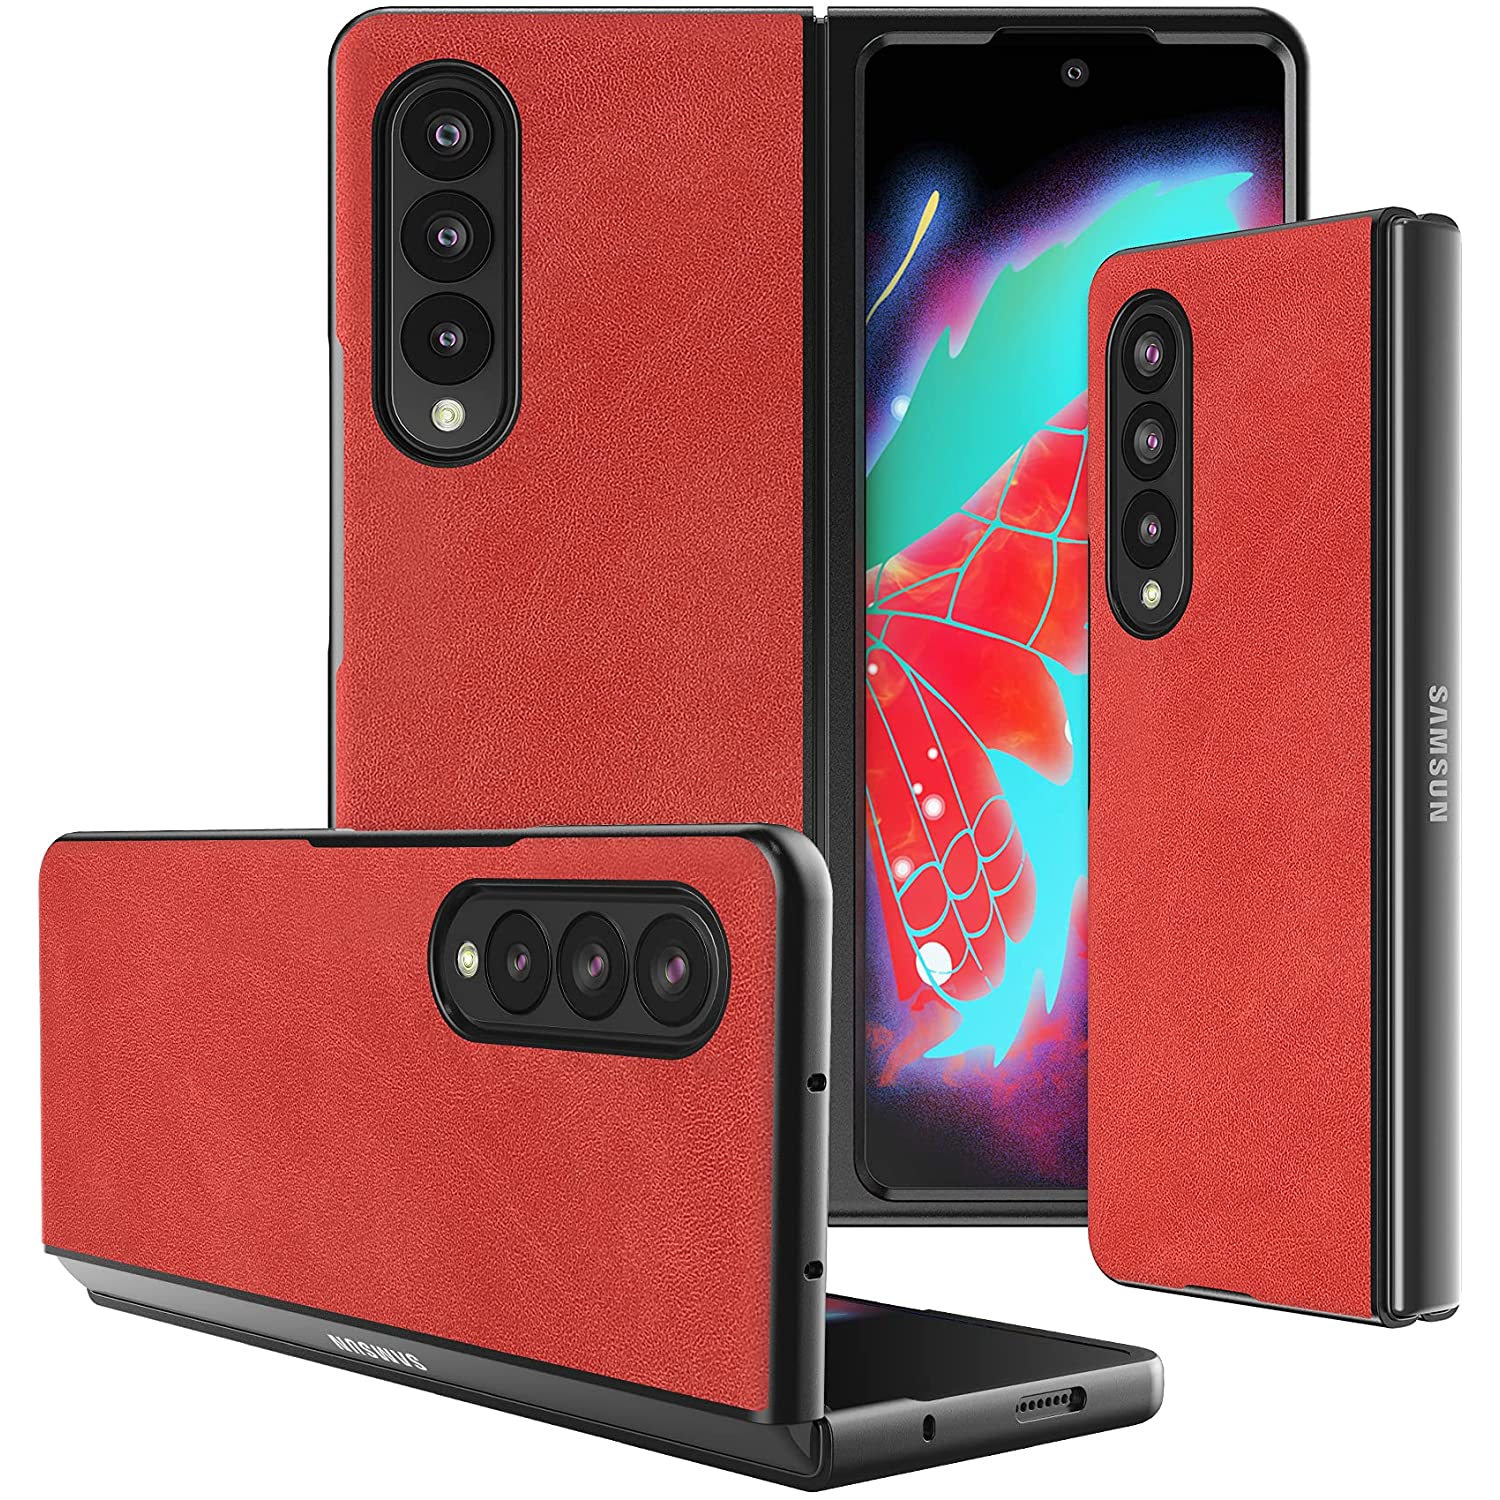 【CSmart】 Slim Fitted Shockproof Hard PC Shell Leather Flip Case Cover for Samsung Galaxy Z Fold 3 5G, Red